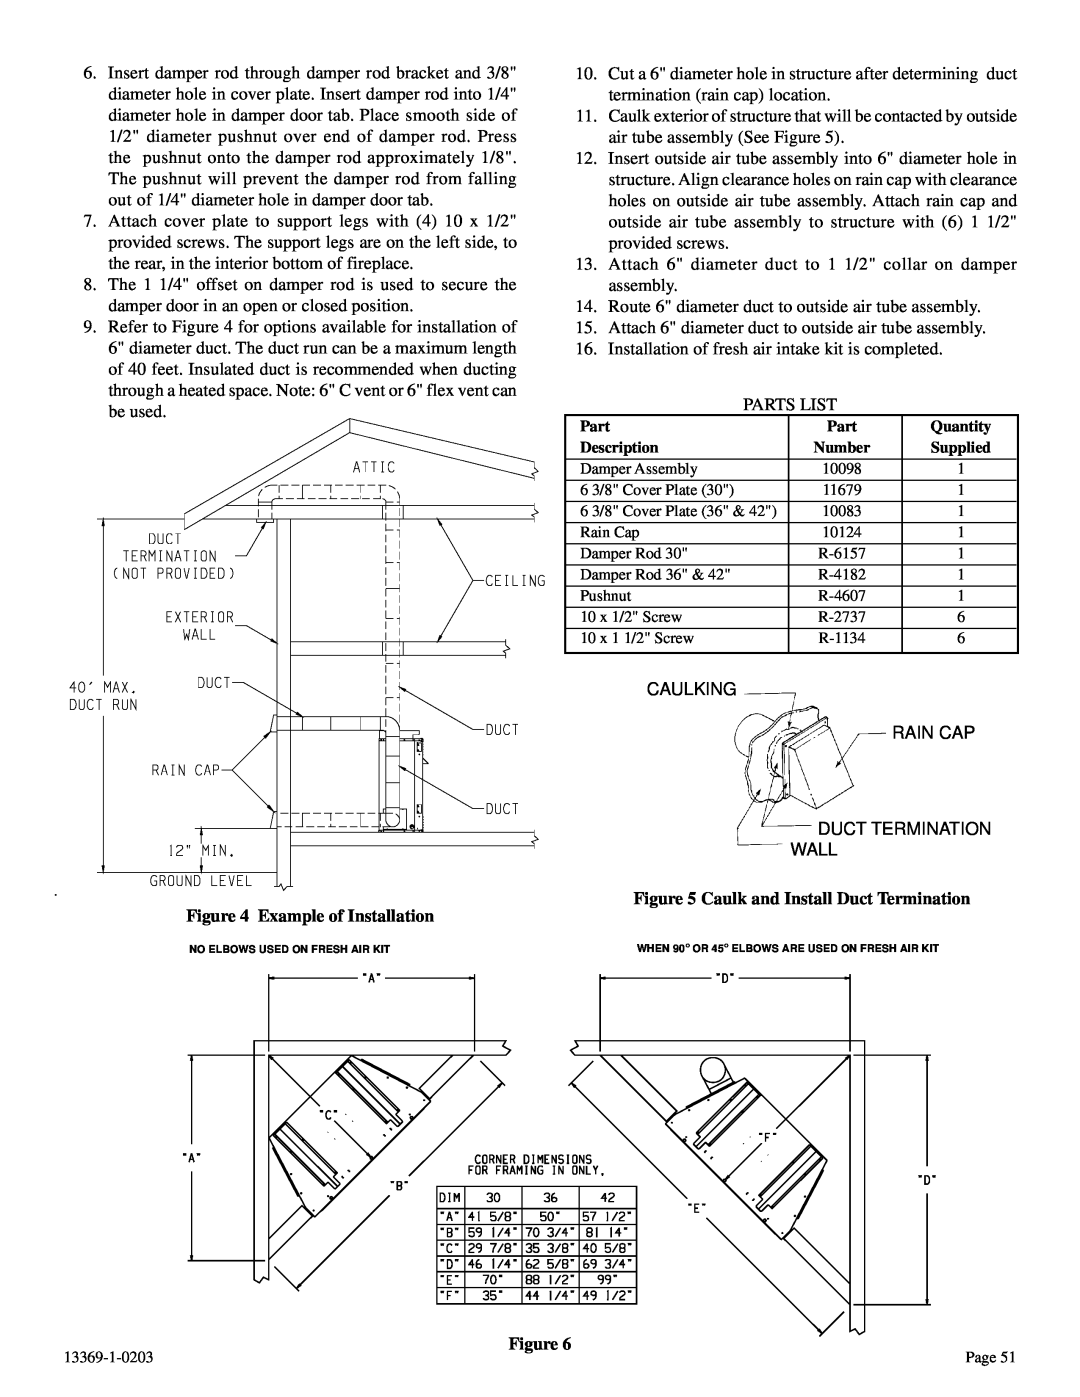 DVS 30-2 installation instructions Example of Installation, Caulk and Install Duct Termination 